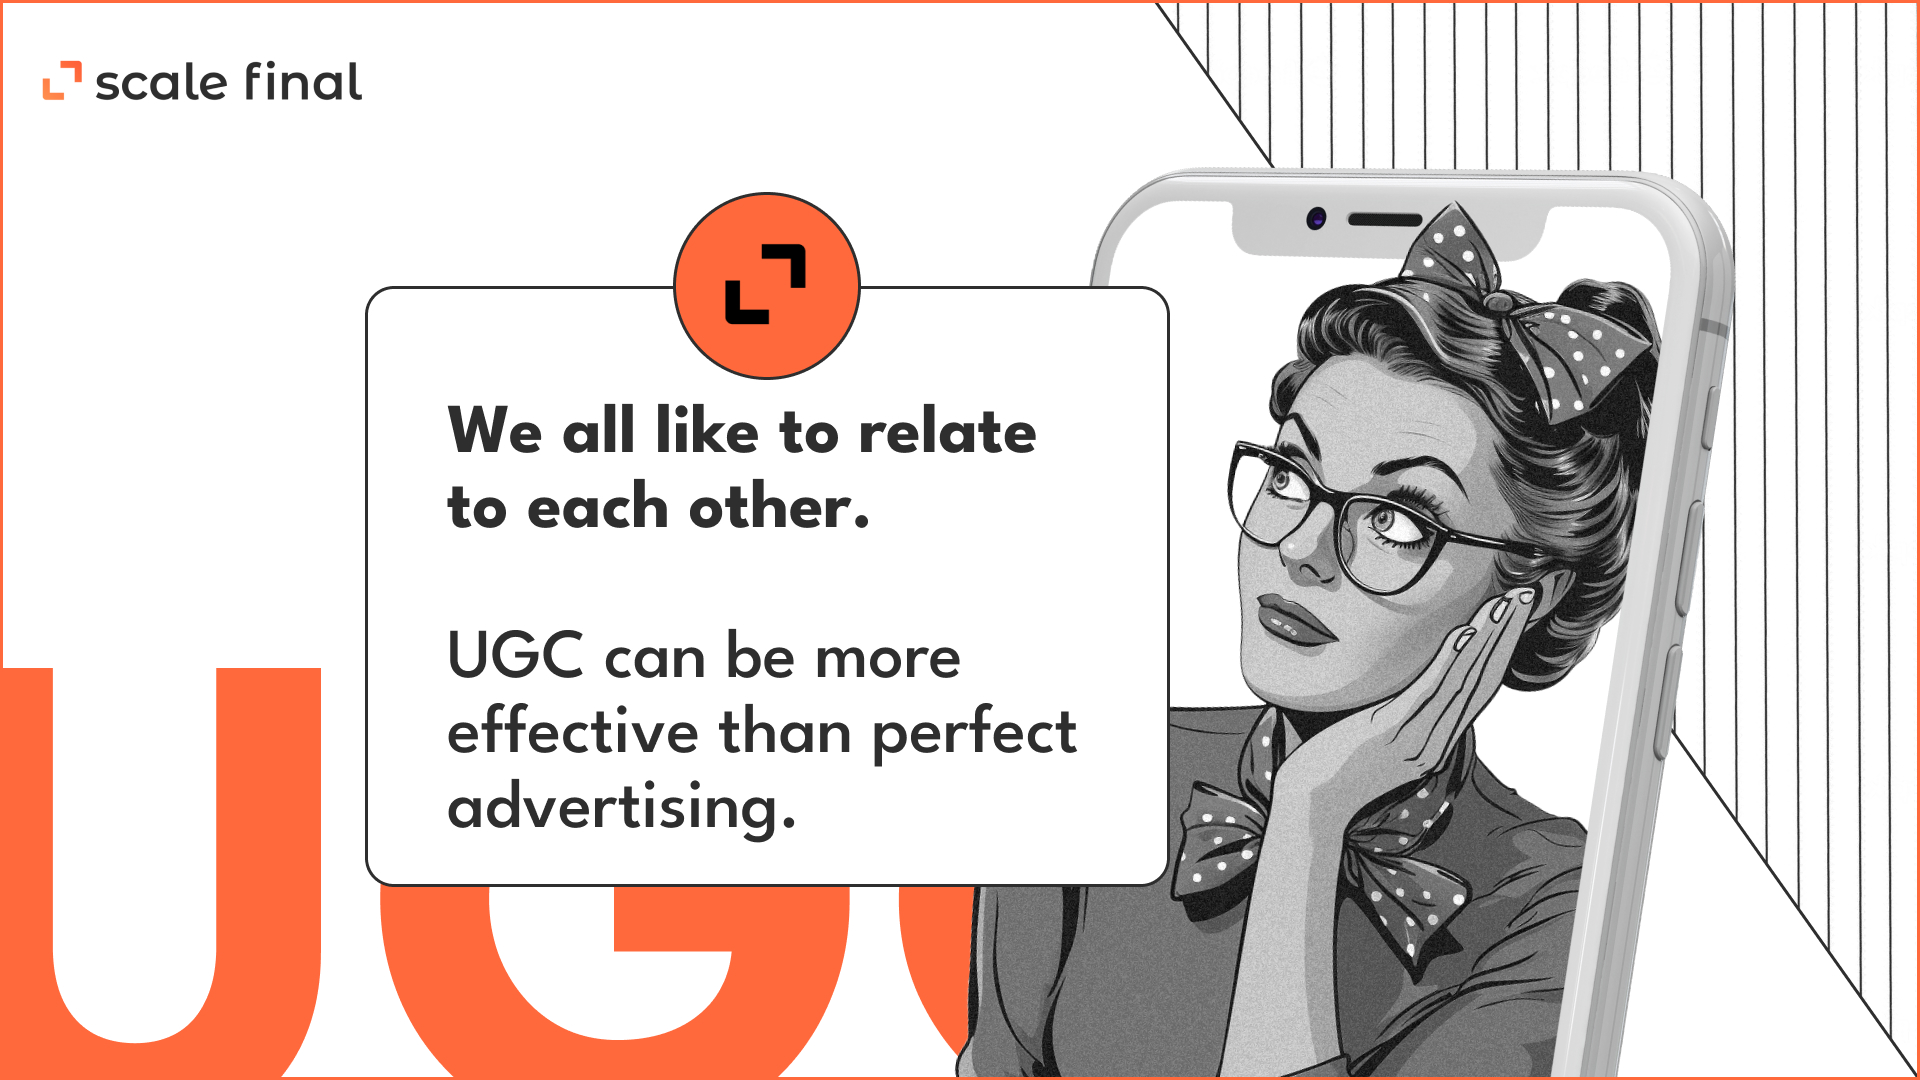 We all like to relate to each other. UGC can be more effective than perfect advertising.